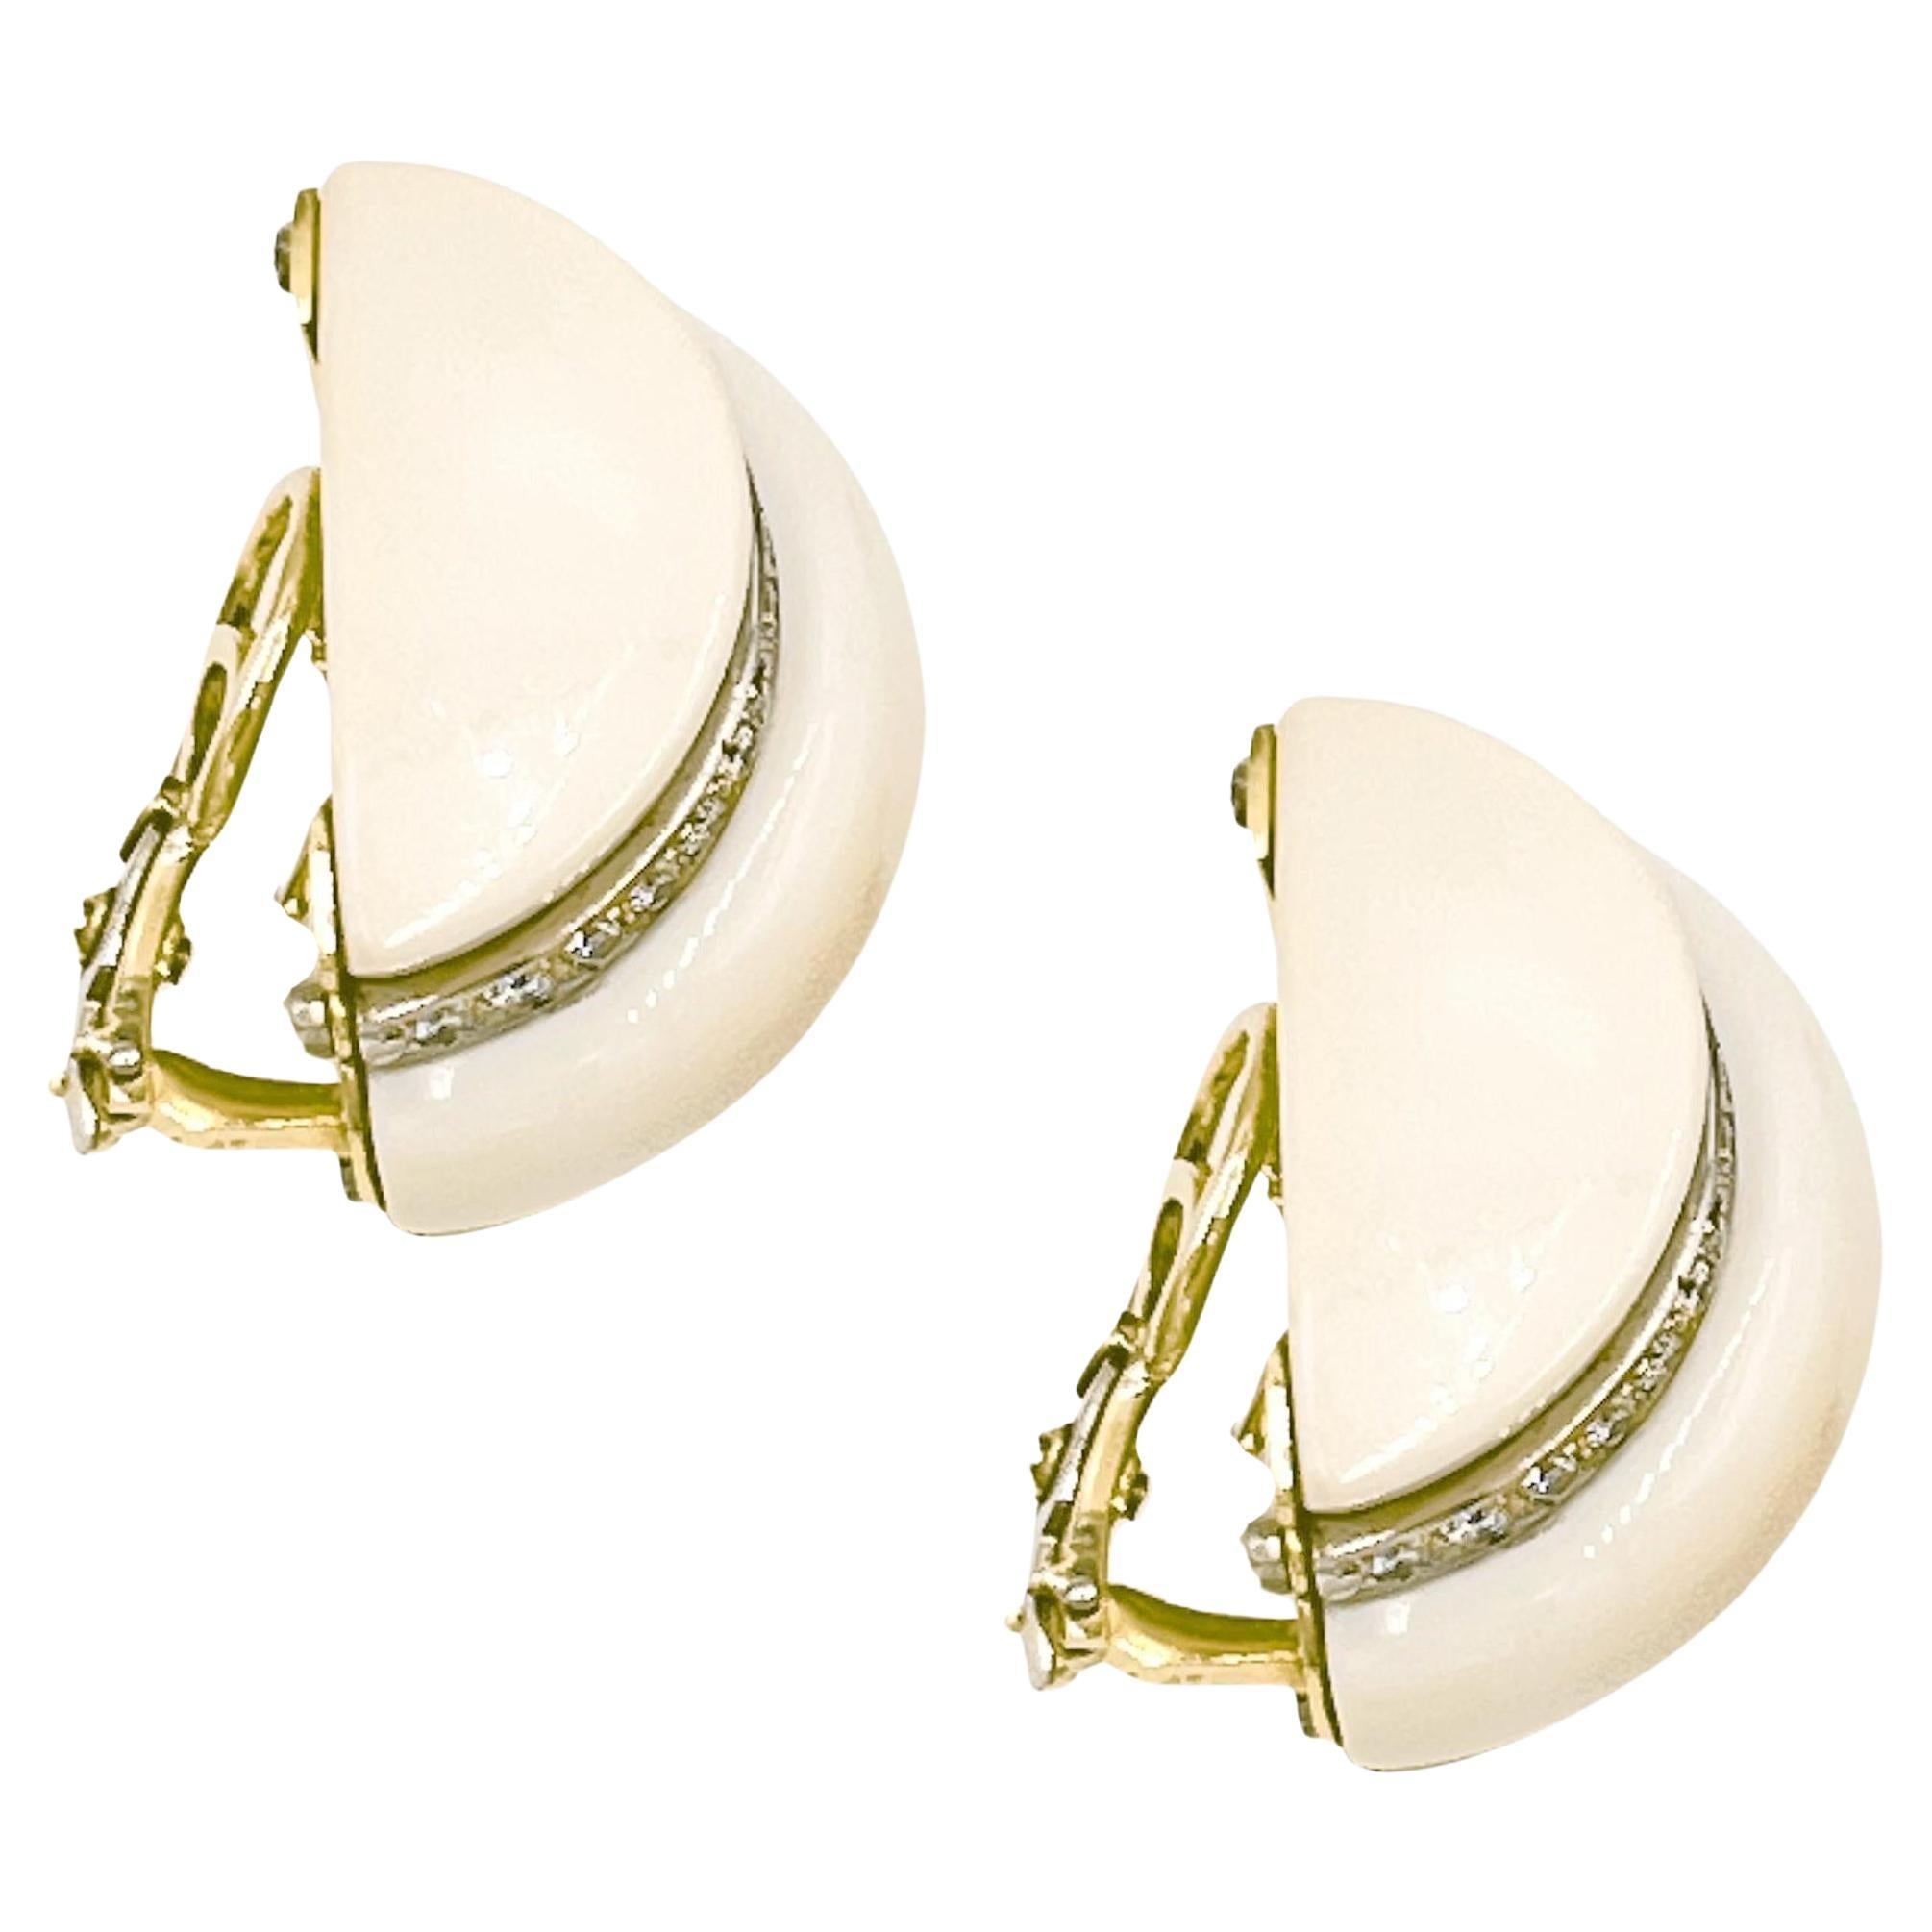 Stylish 18k yellow gold earrings set with polished cocholong in arched sections accented by round diamonds set in platinum. Clip earrings with omega style backs. Sixty-four round brilliant-cut diamonds weighing approximately 2.50 total carats. 1.37